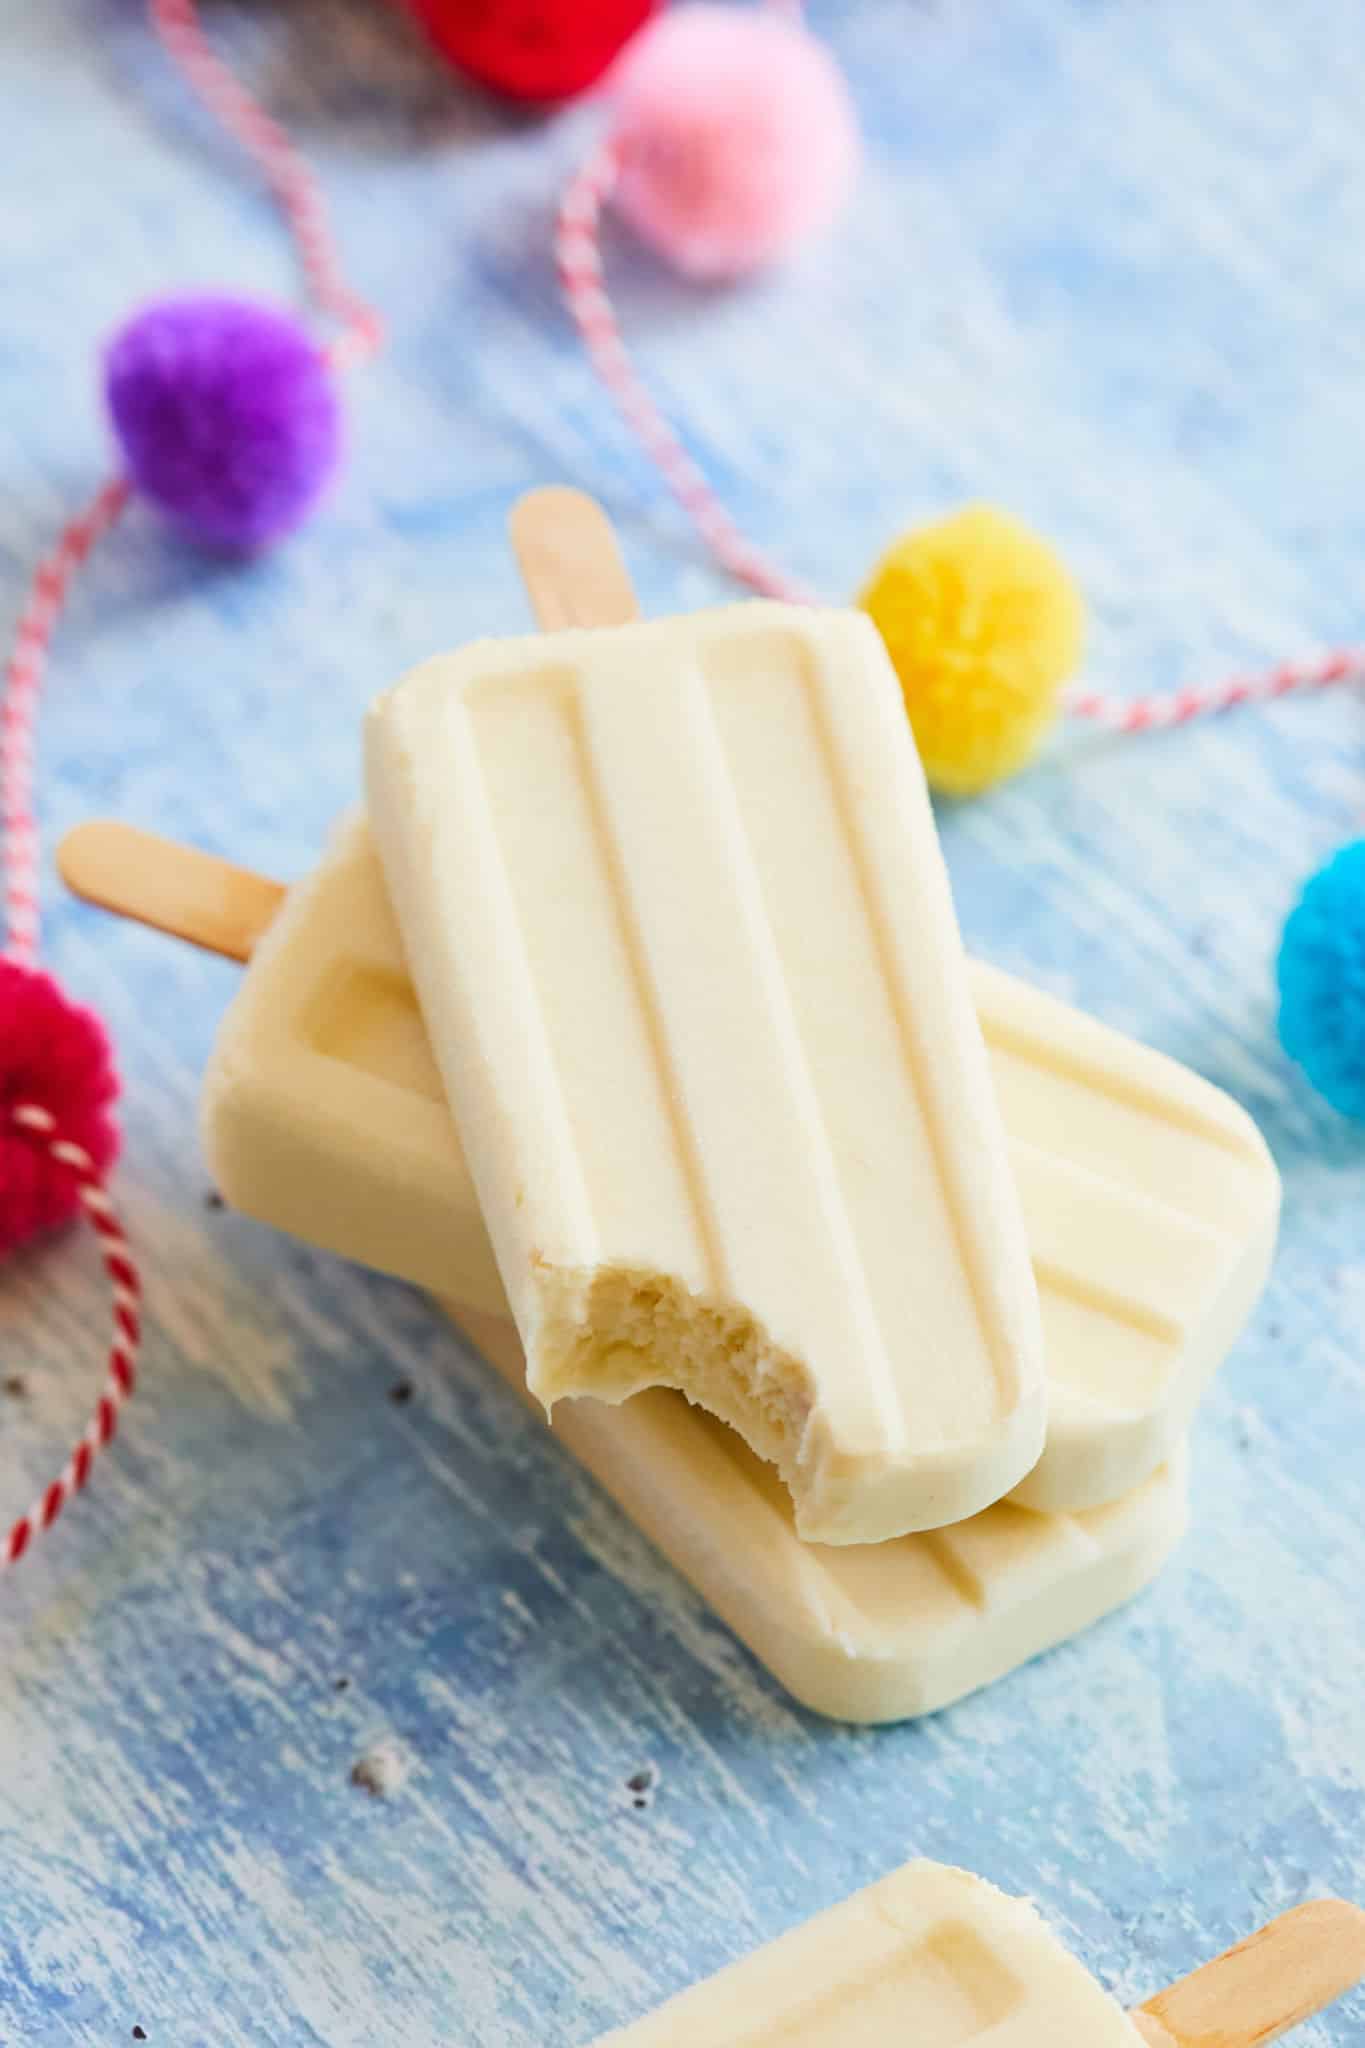 A piña colada popsicle from my recipe with a bite taken out of it.